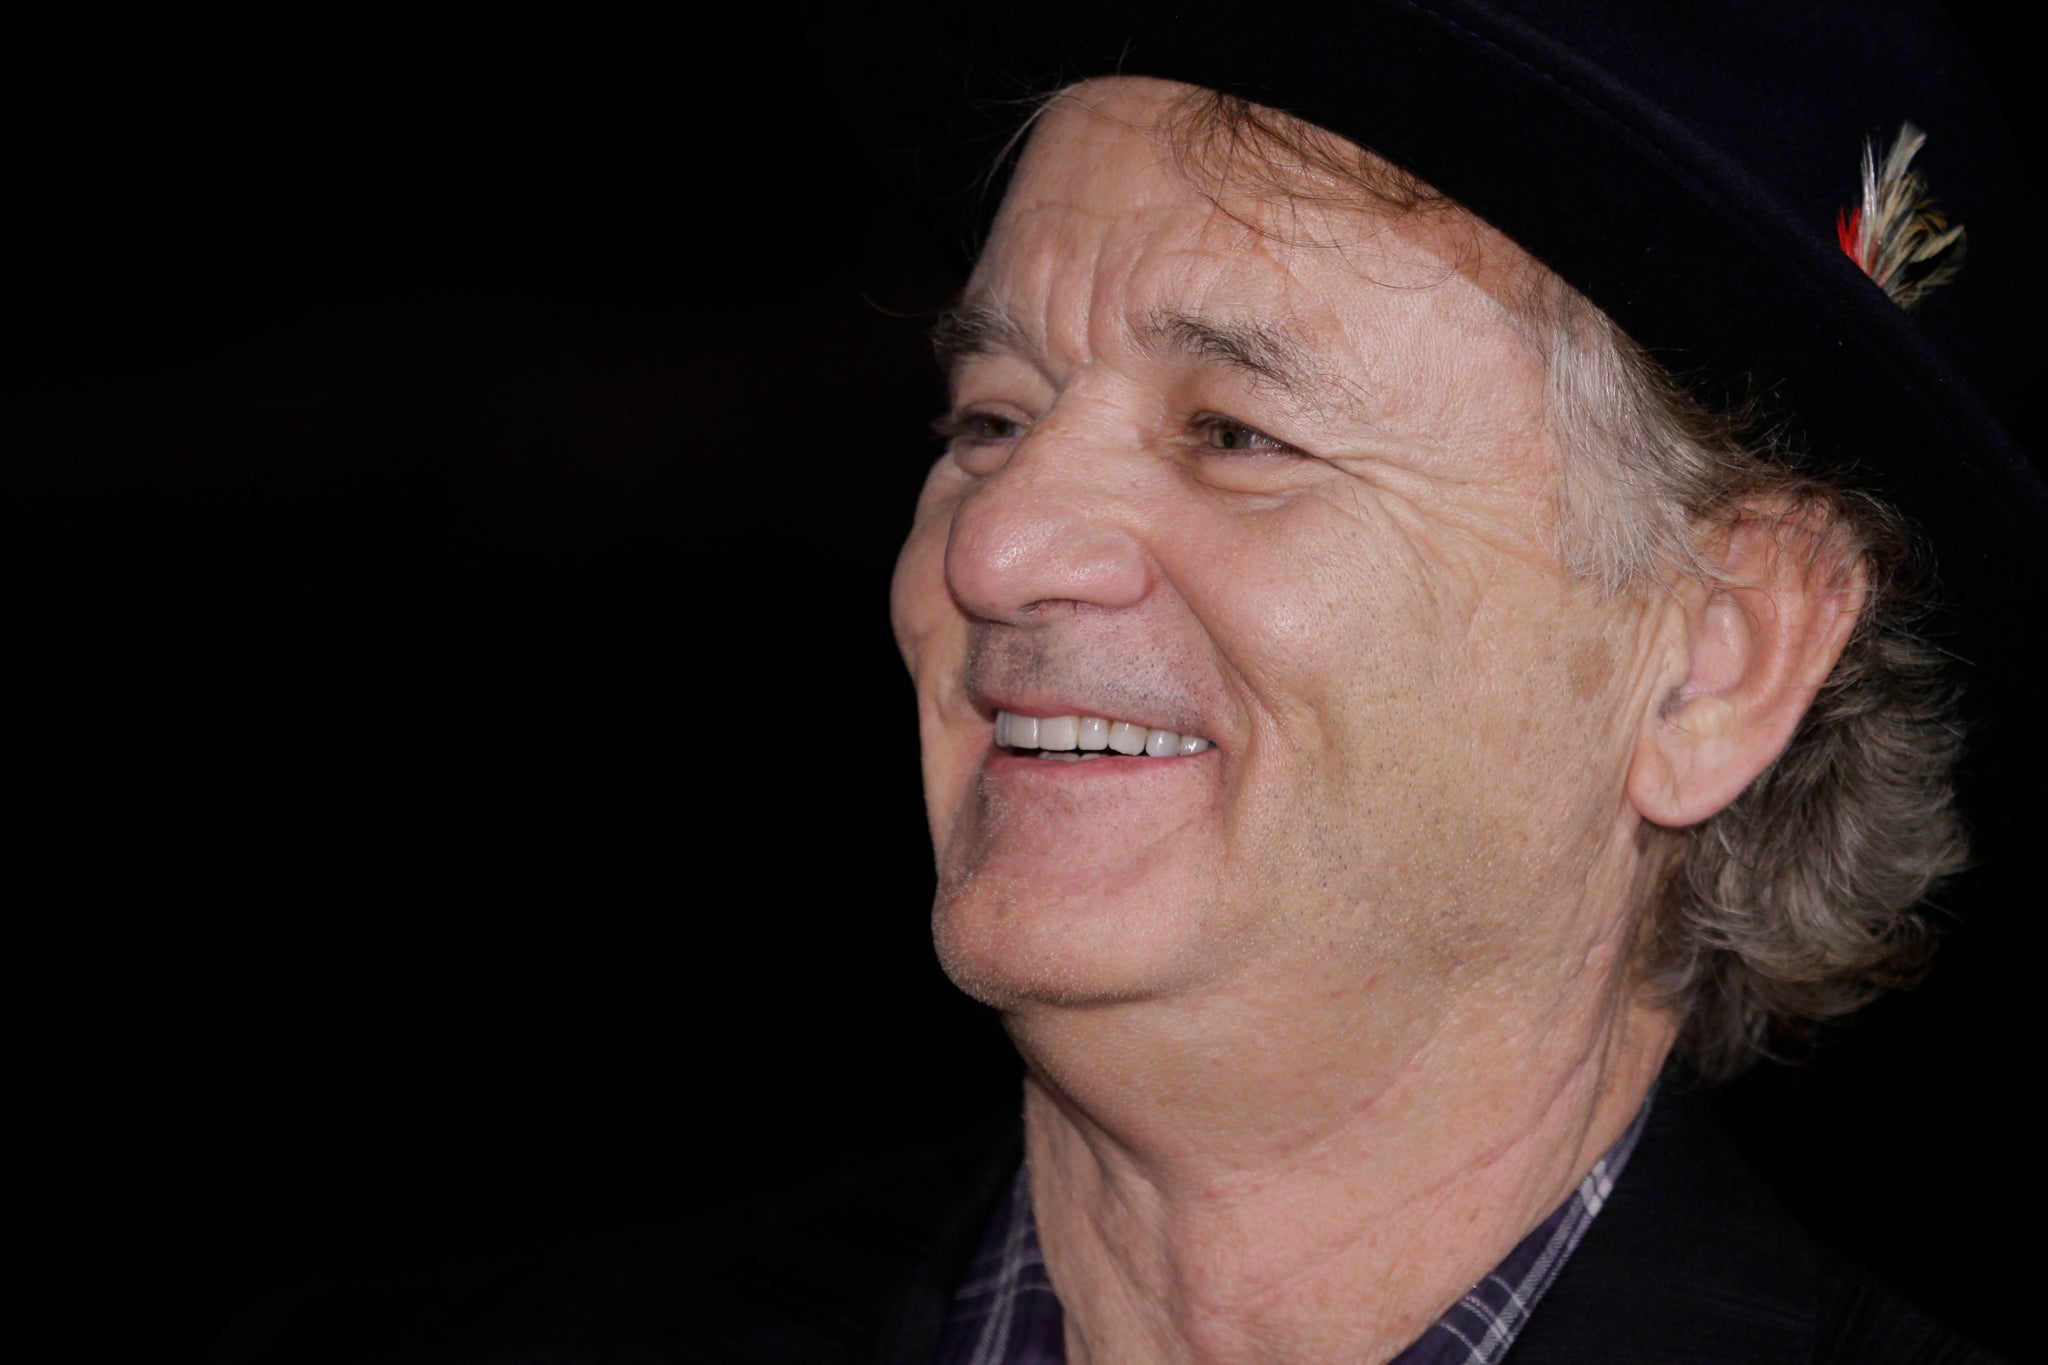 Bill Murray has called for the Elgin Marbles to be returned to Greece